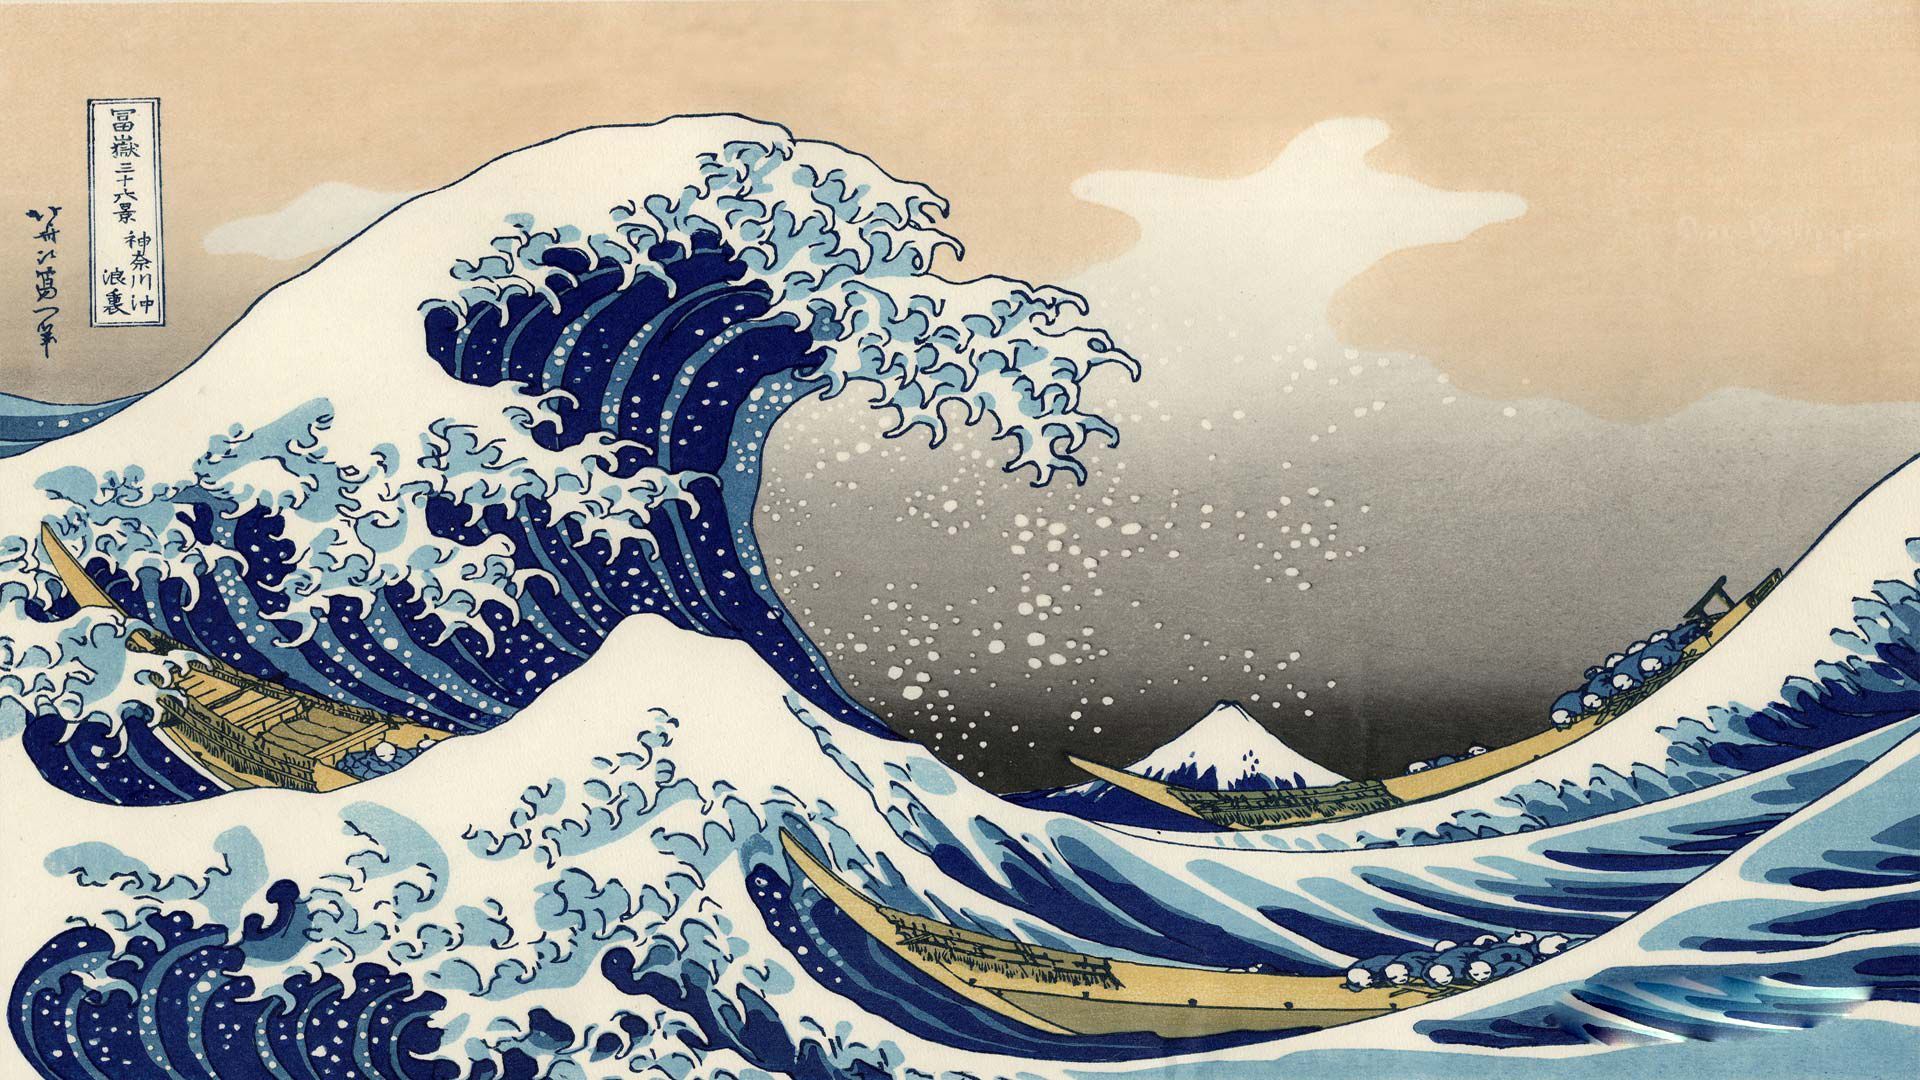 A painting of the great wave off kobu - Art, indie, computer, Japanese, The Great Wave off Kanagawa